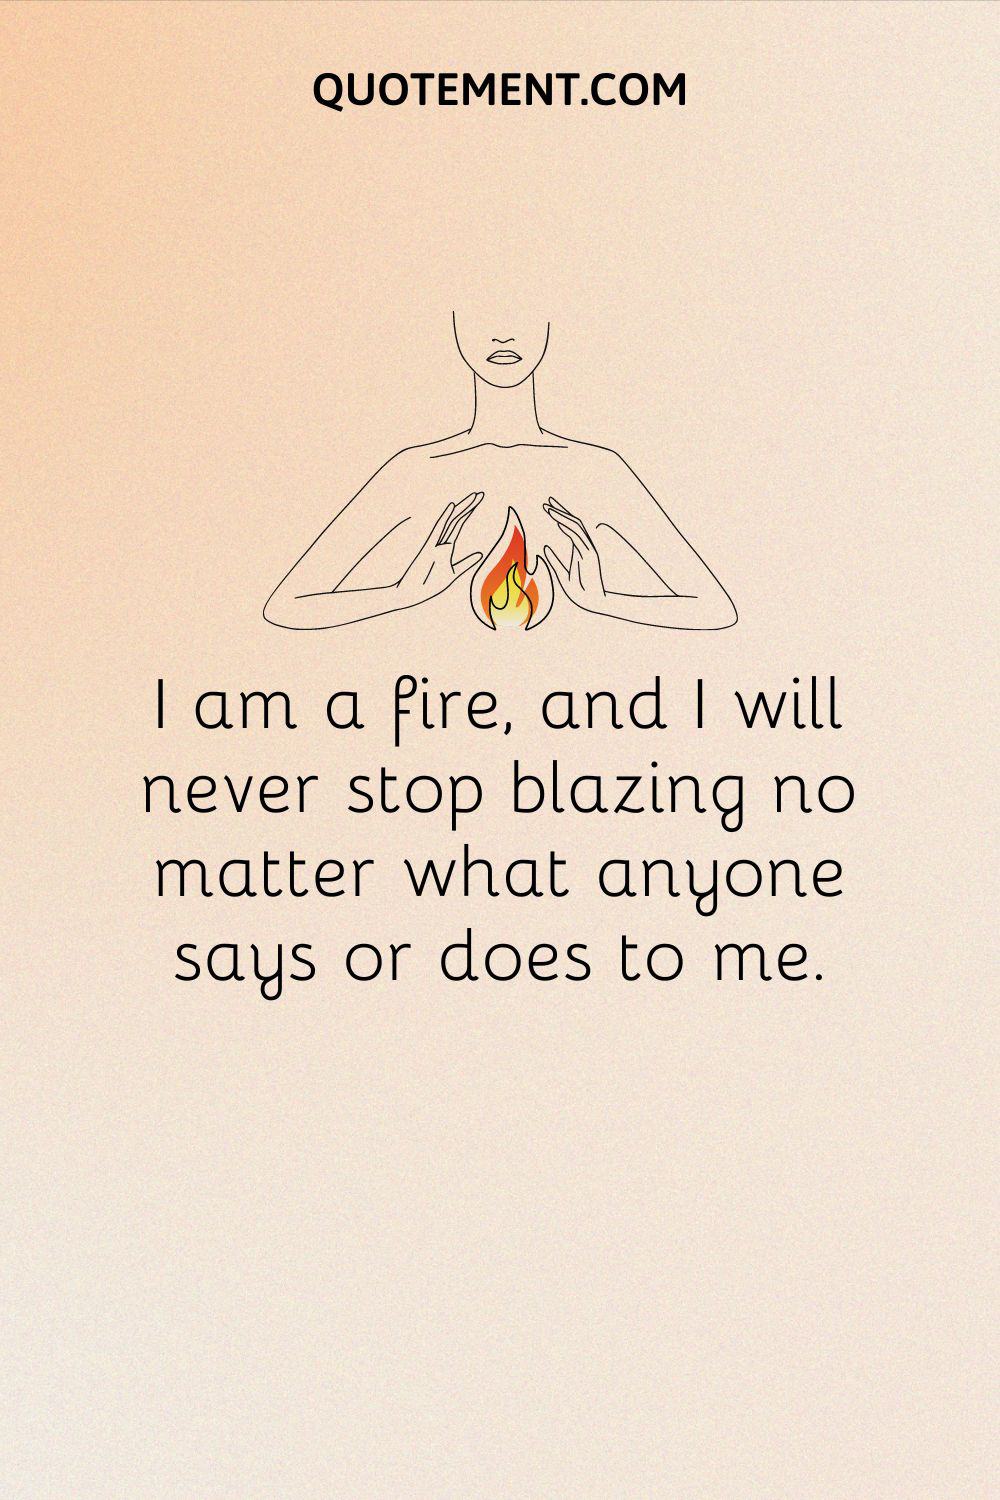 I am a fire, and I will never stop blazing no matter what anyone says or does to me